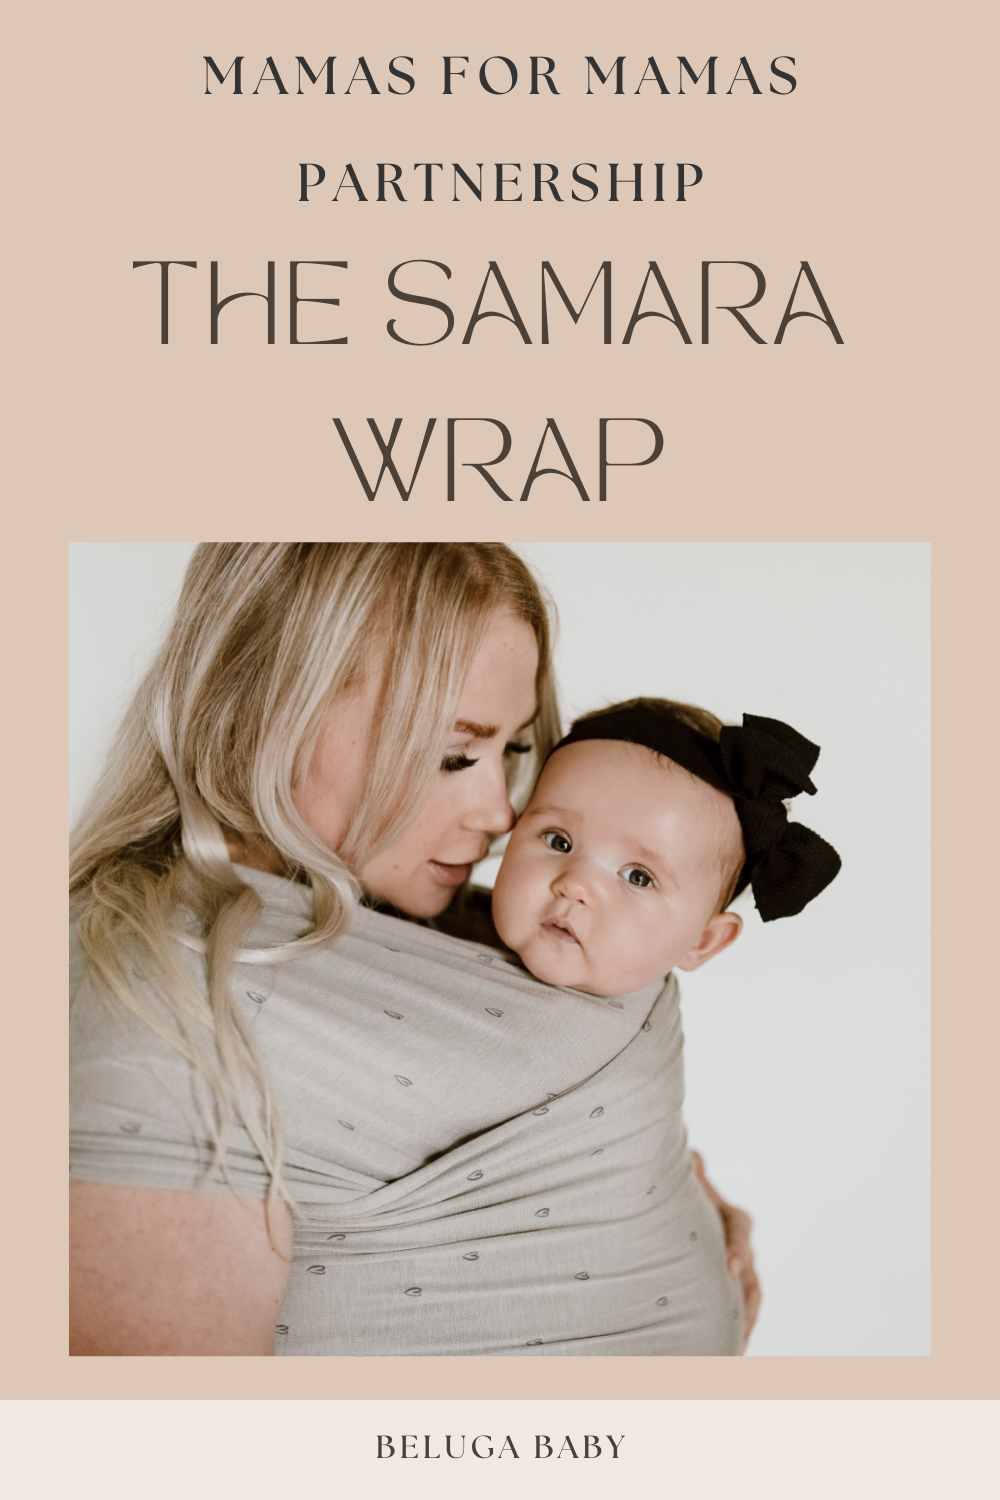 The Samara Wrap - From Tragedy to Hope